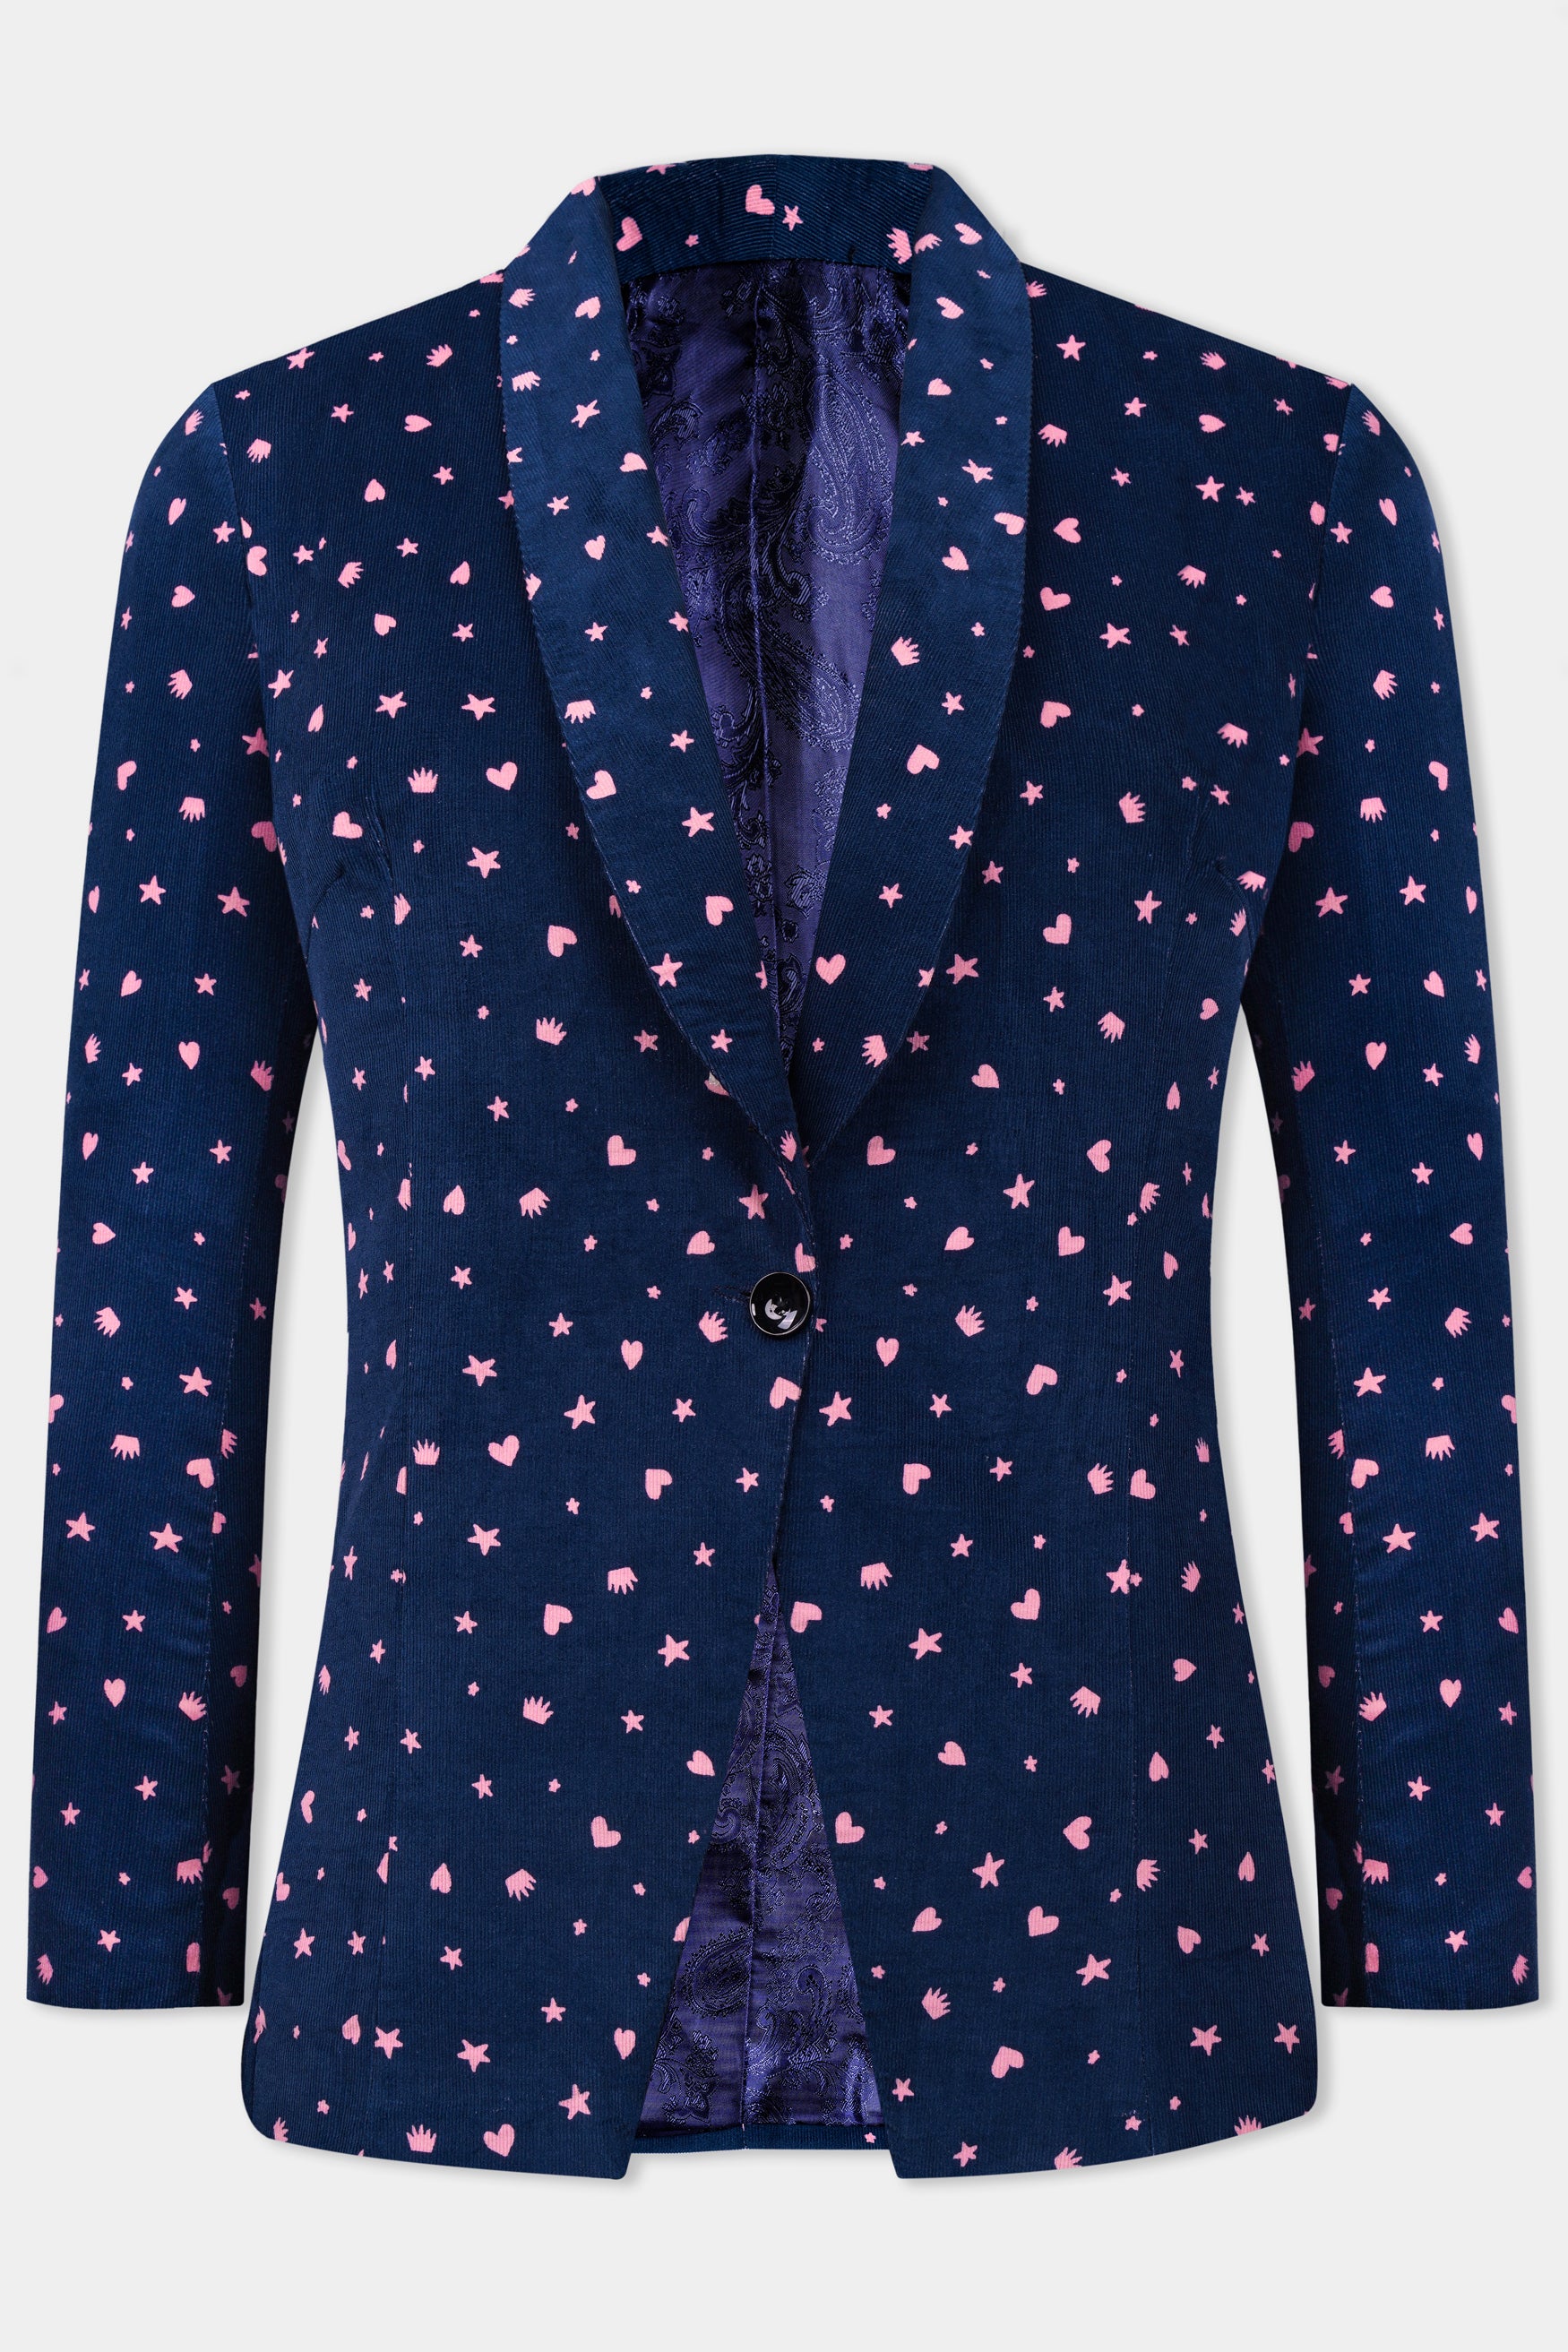 Downriver Blue and Cavern Pink Shapes Printed Premium Cotton Women’s Tuxedo Suit